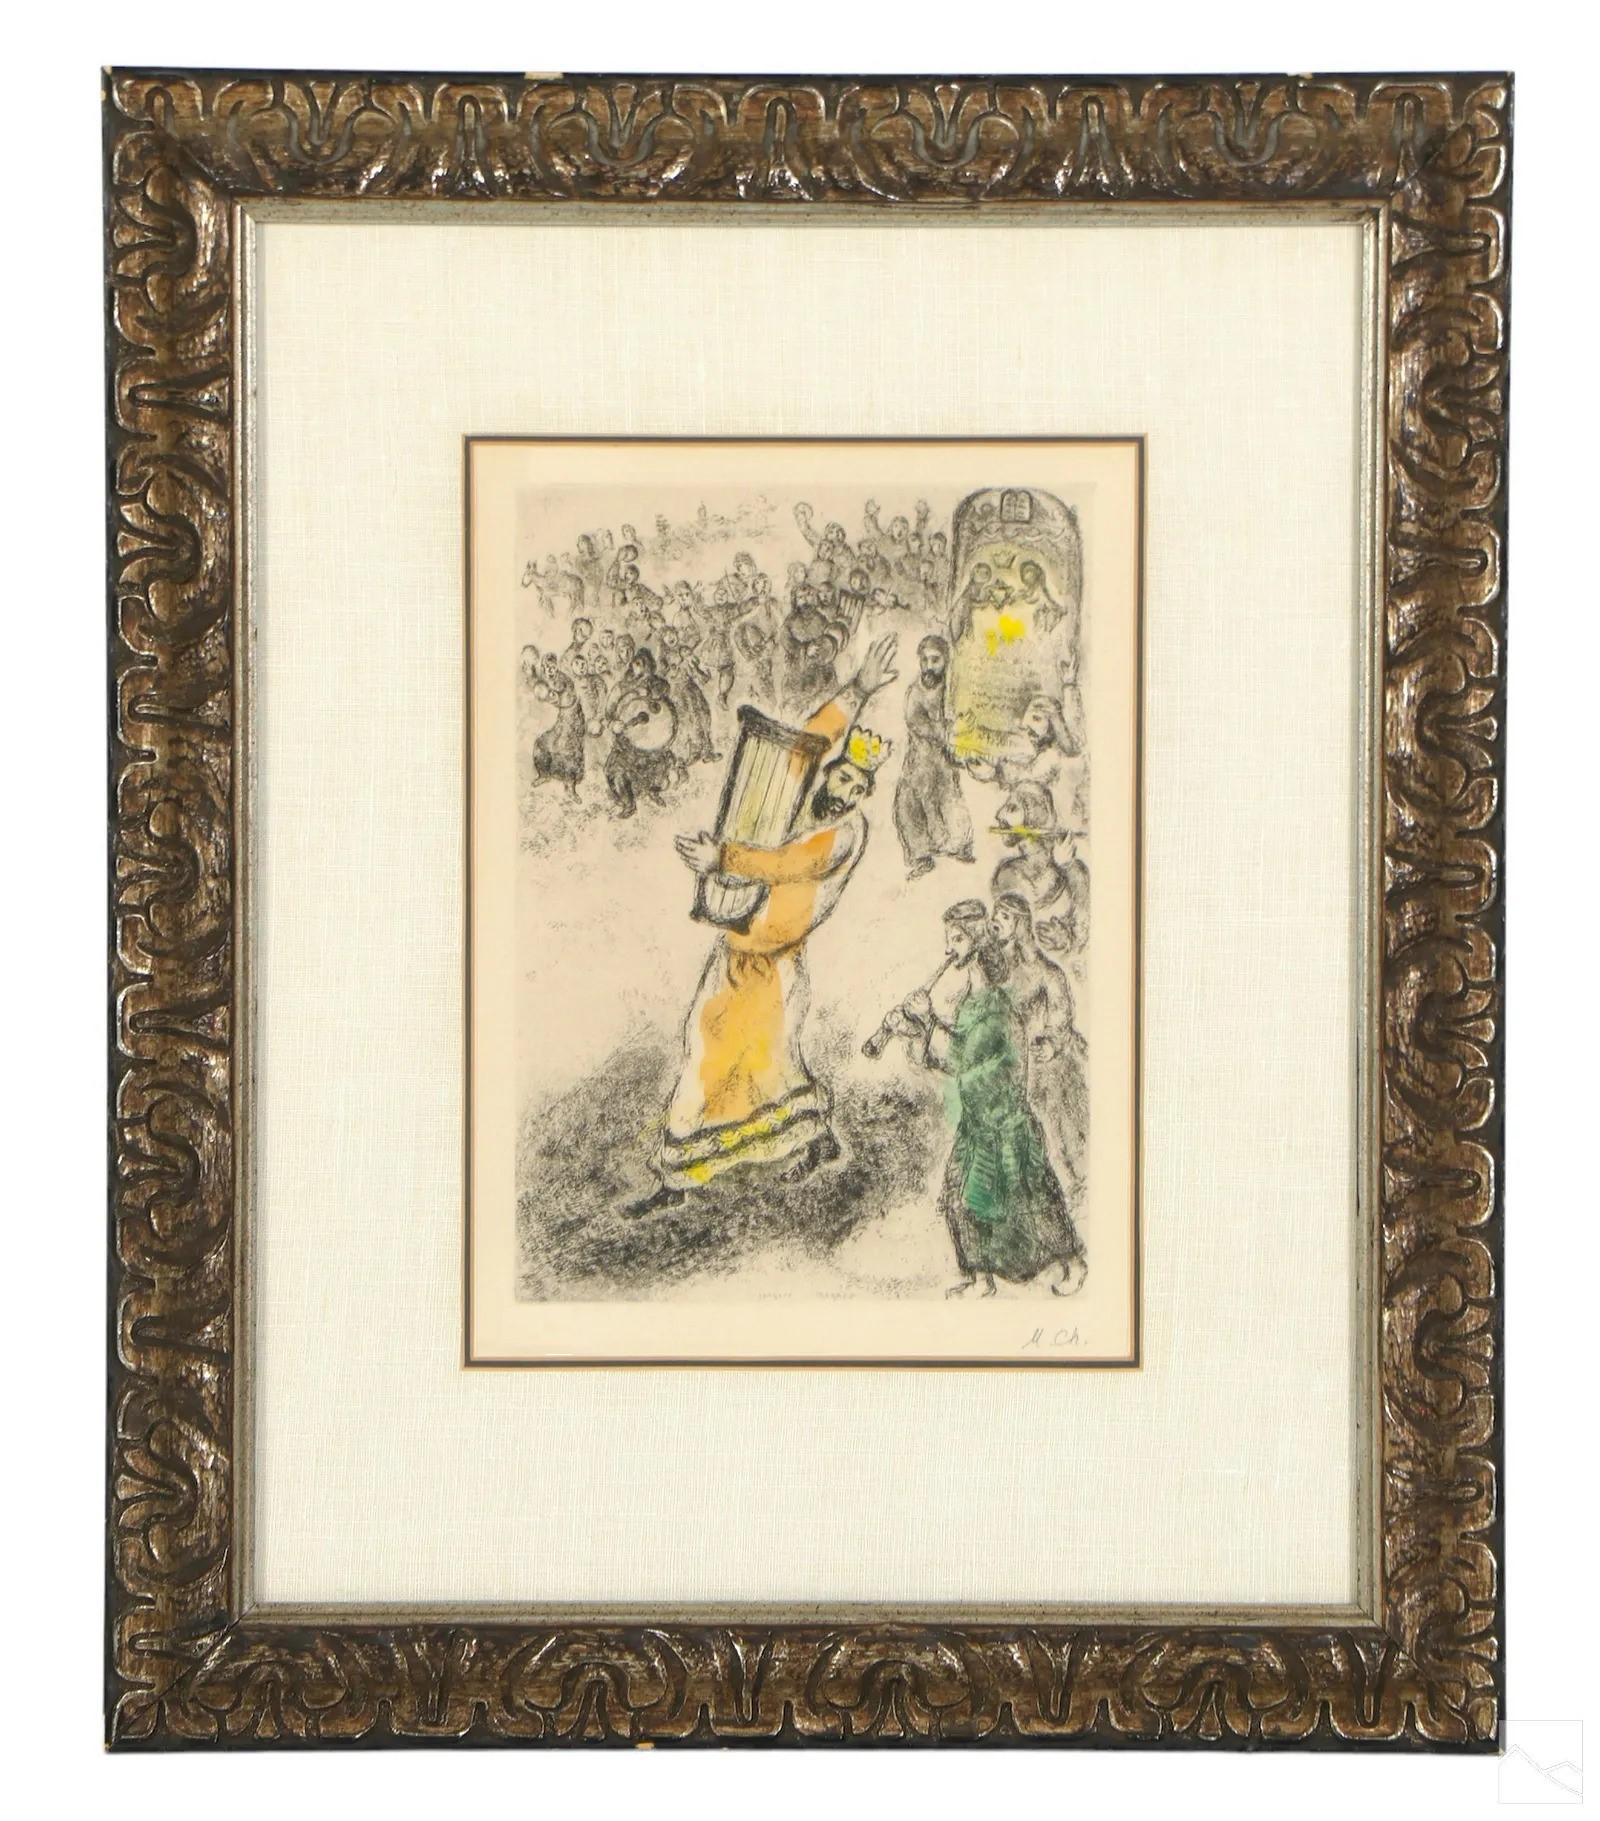 The Following Item we are Offering is A RARE IMPORTANT AND EXQUISITE HAND COLORED MARC CHAGALL (Russian, 1887-1985) Marc Chagall Signed and Numbered LIMITED EDITION Lithograph. Signed lower right, M. Ch., on Arches woven Paper Originally from World